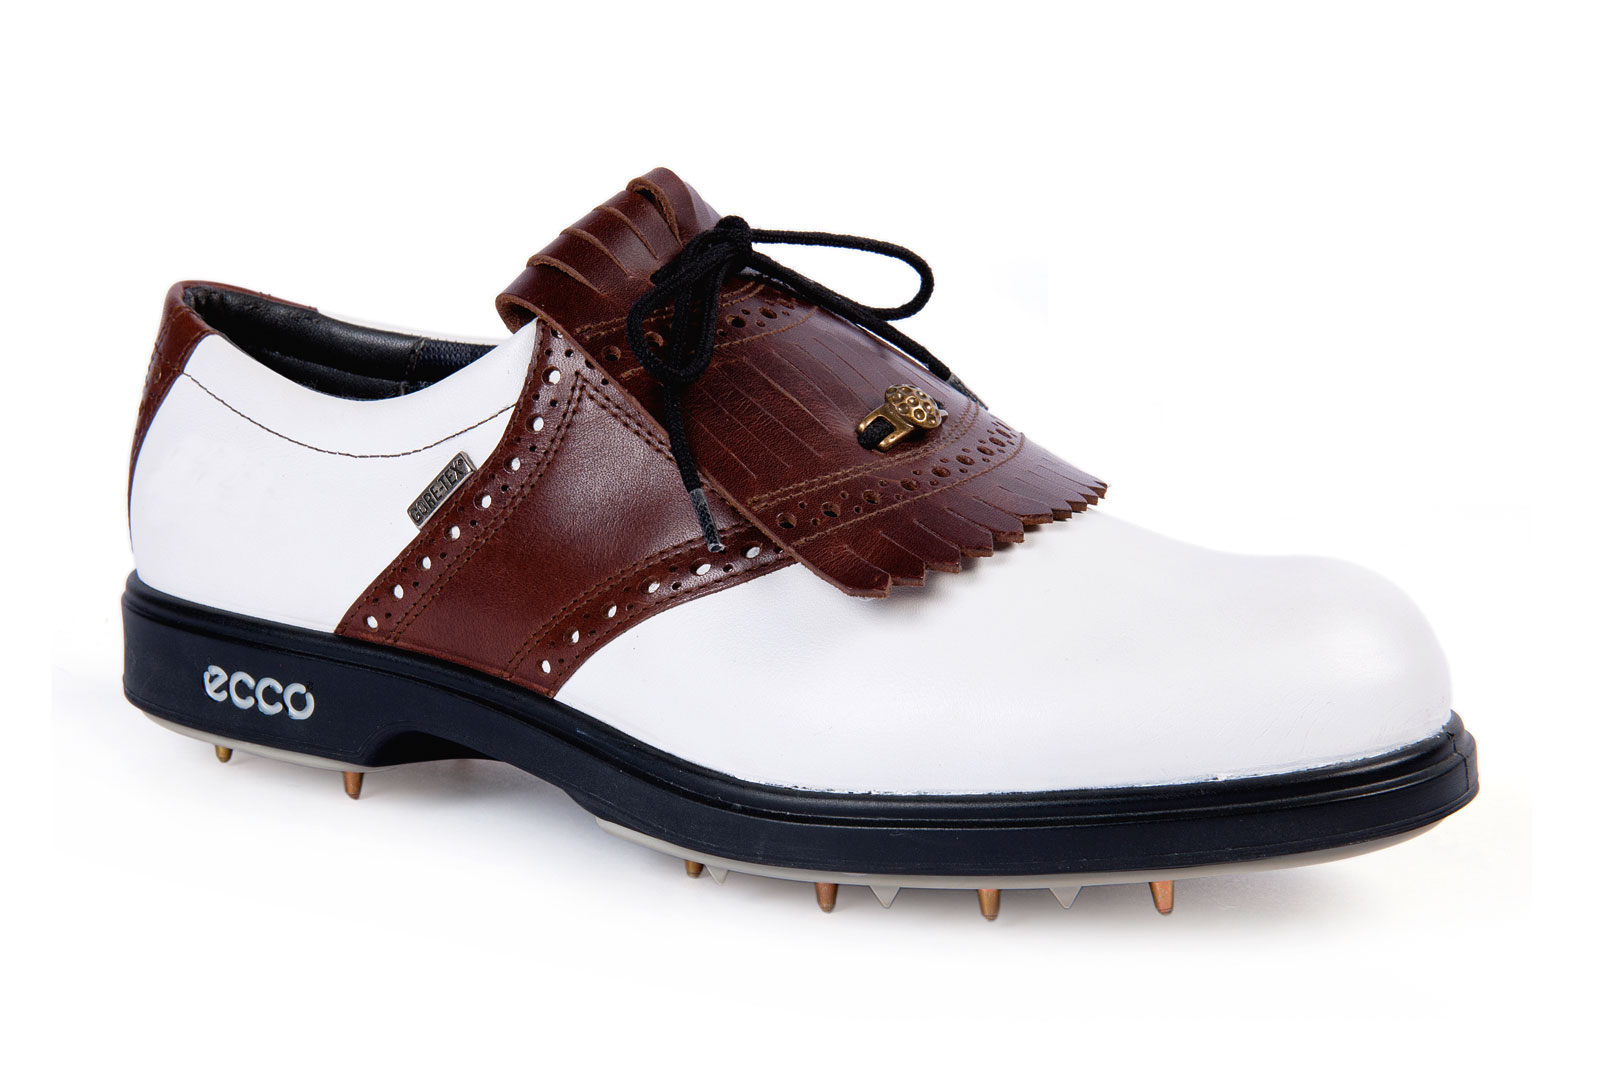 1996: The first pair of ECCO GOLF shoes is sold in Denmark